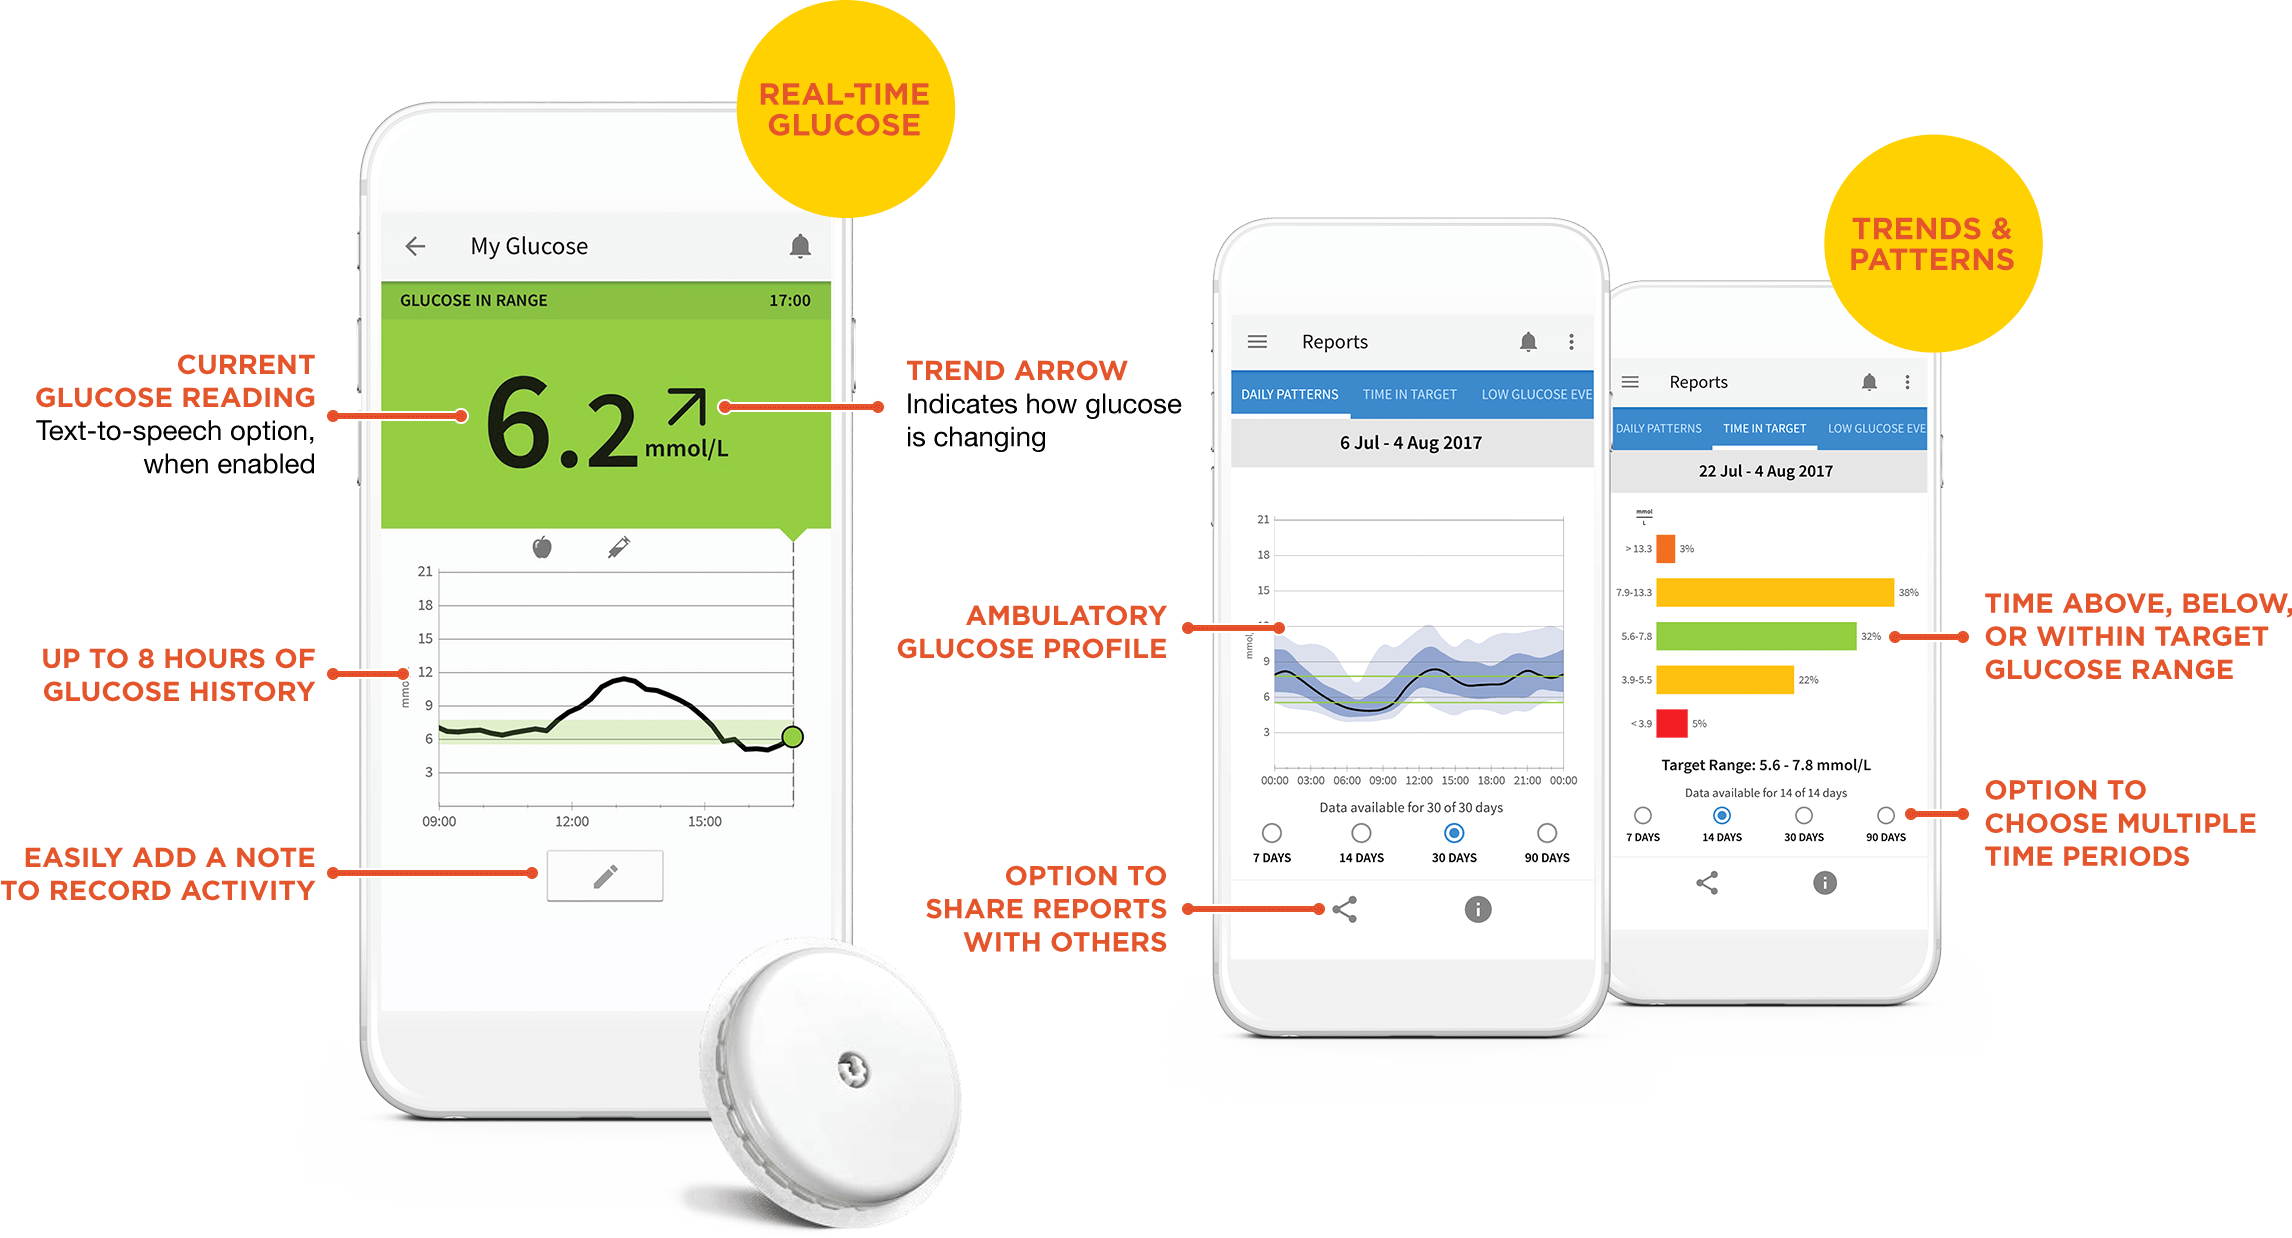 Real-Time Glucose and Trends & Patterns